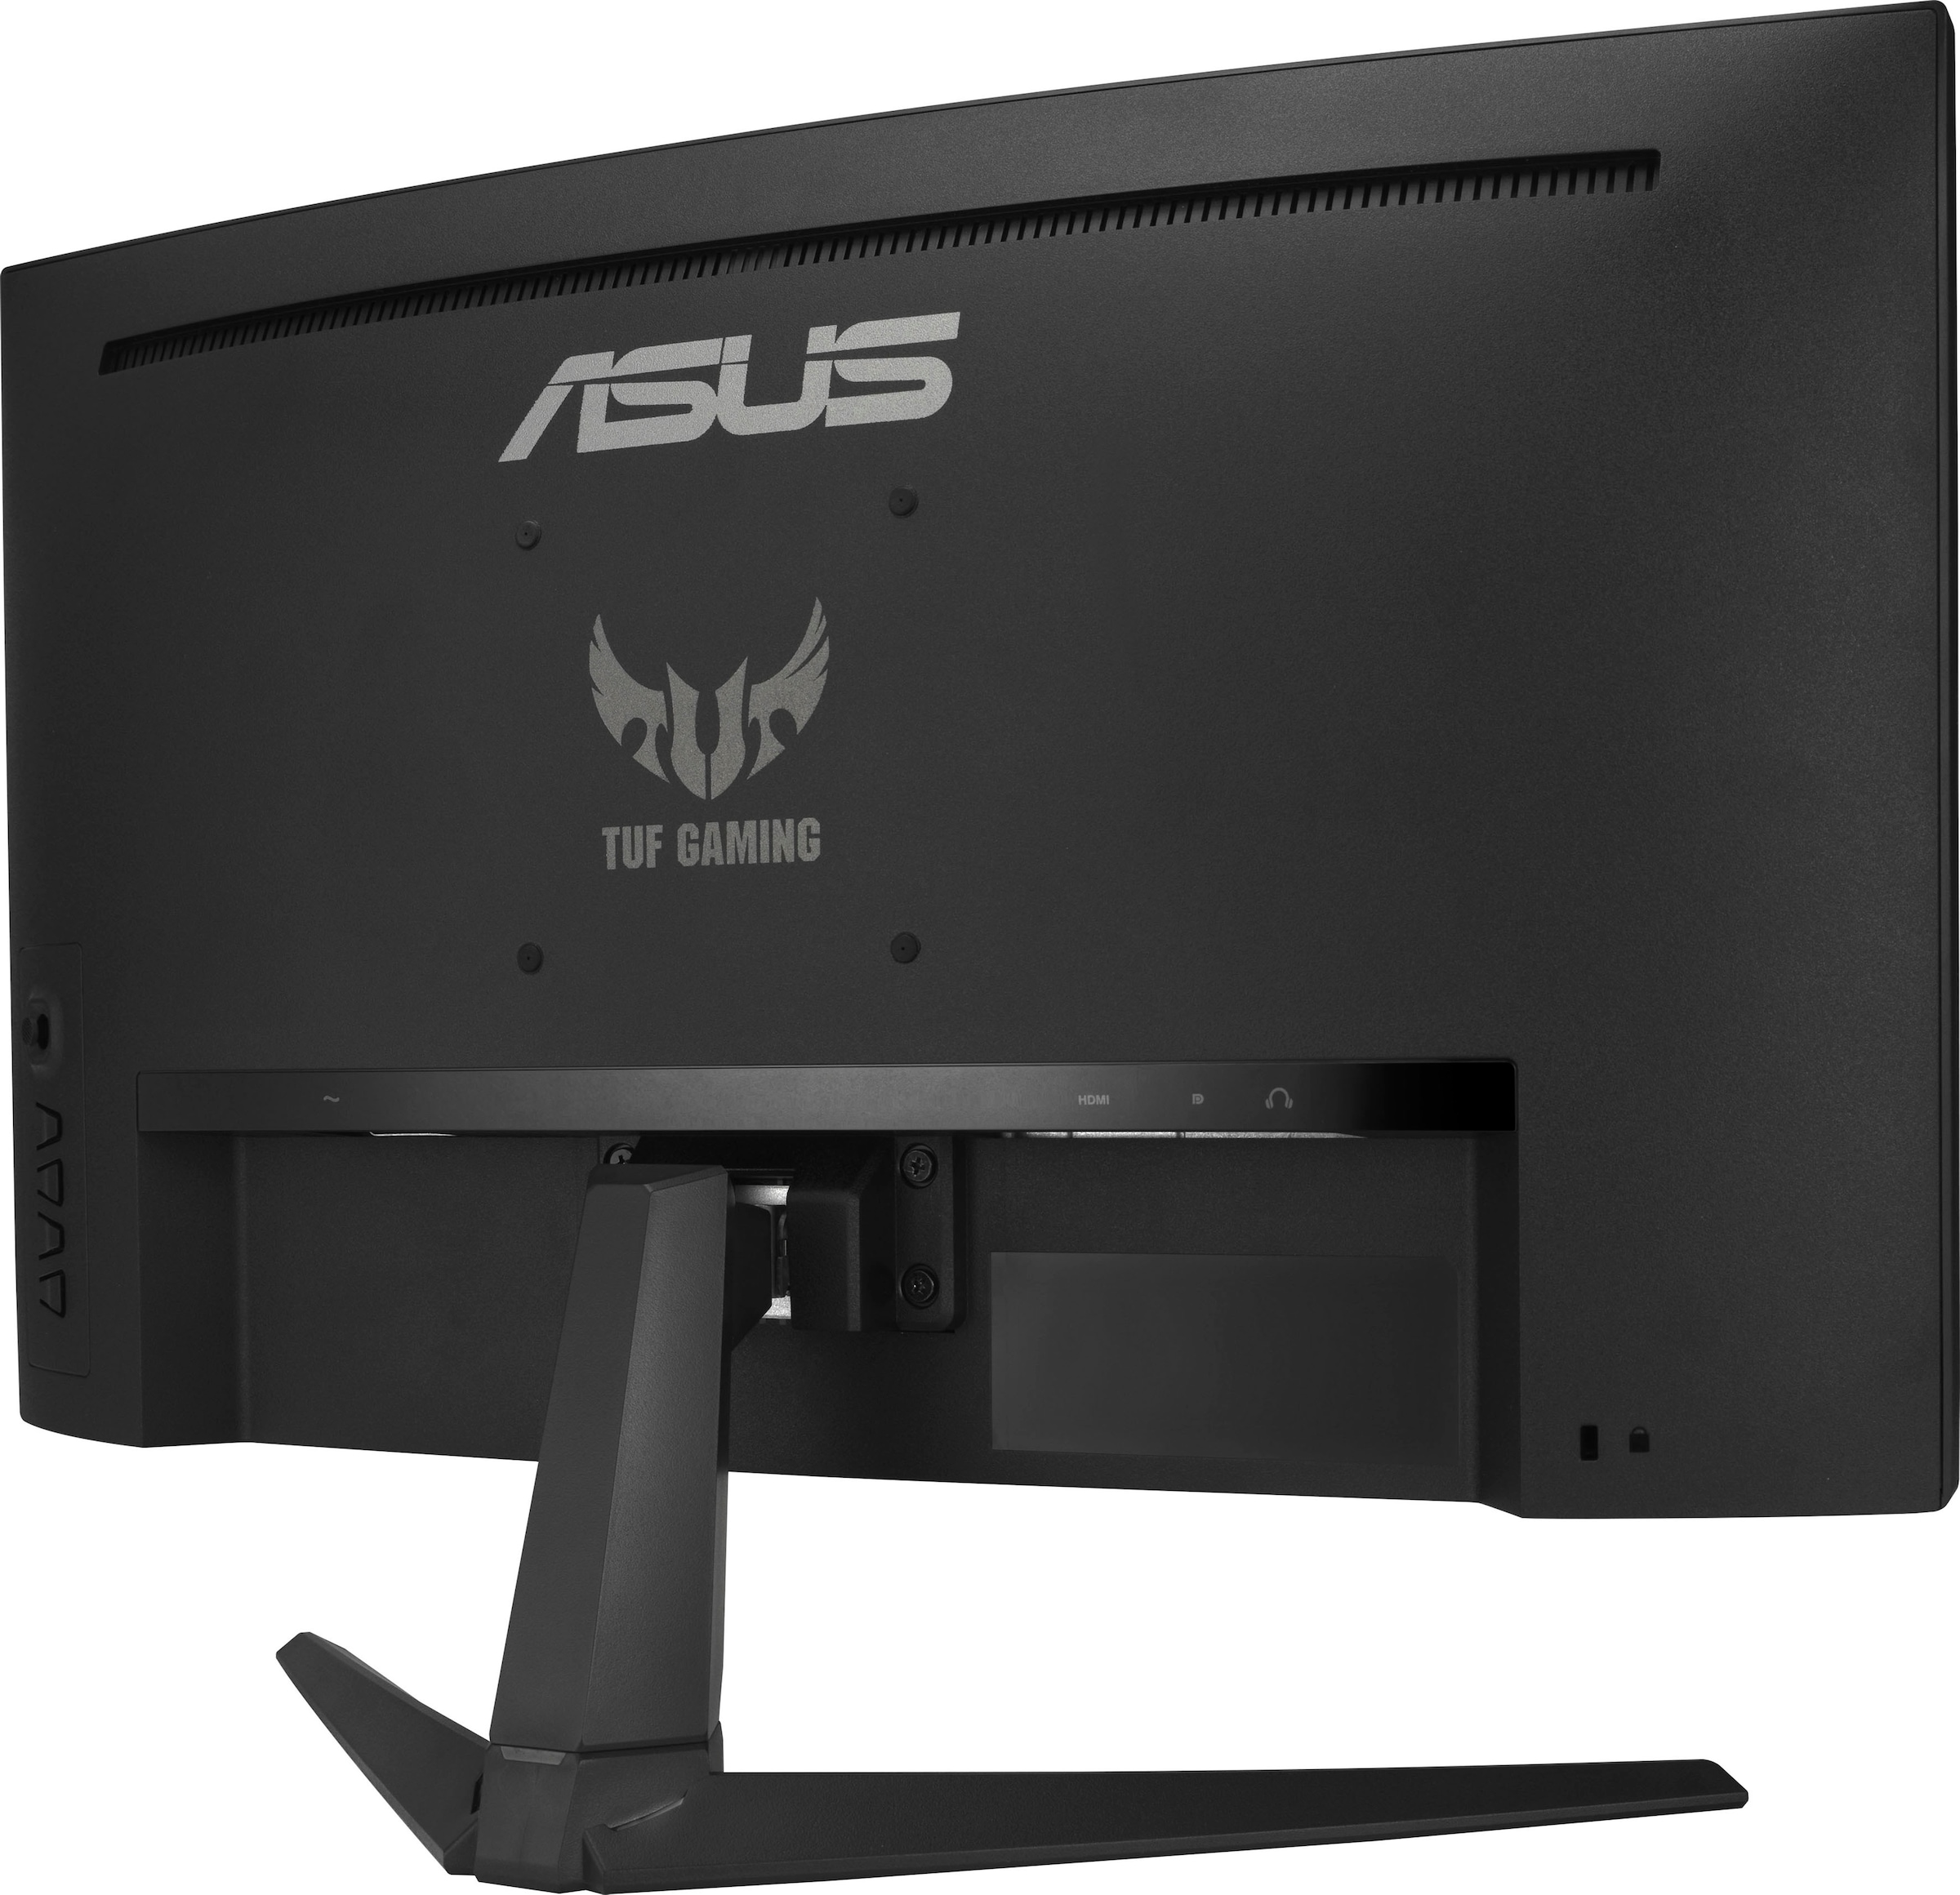 Asus LED-Monitor »ASUS Monitor«, 60,5 cm/23,8 Zoll, 1920 x 1080 px, Full HD, 1 ms Reaktionszeit, 165 Hz